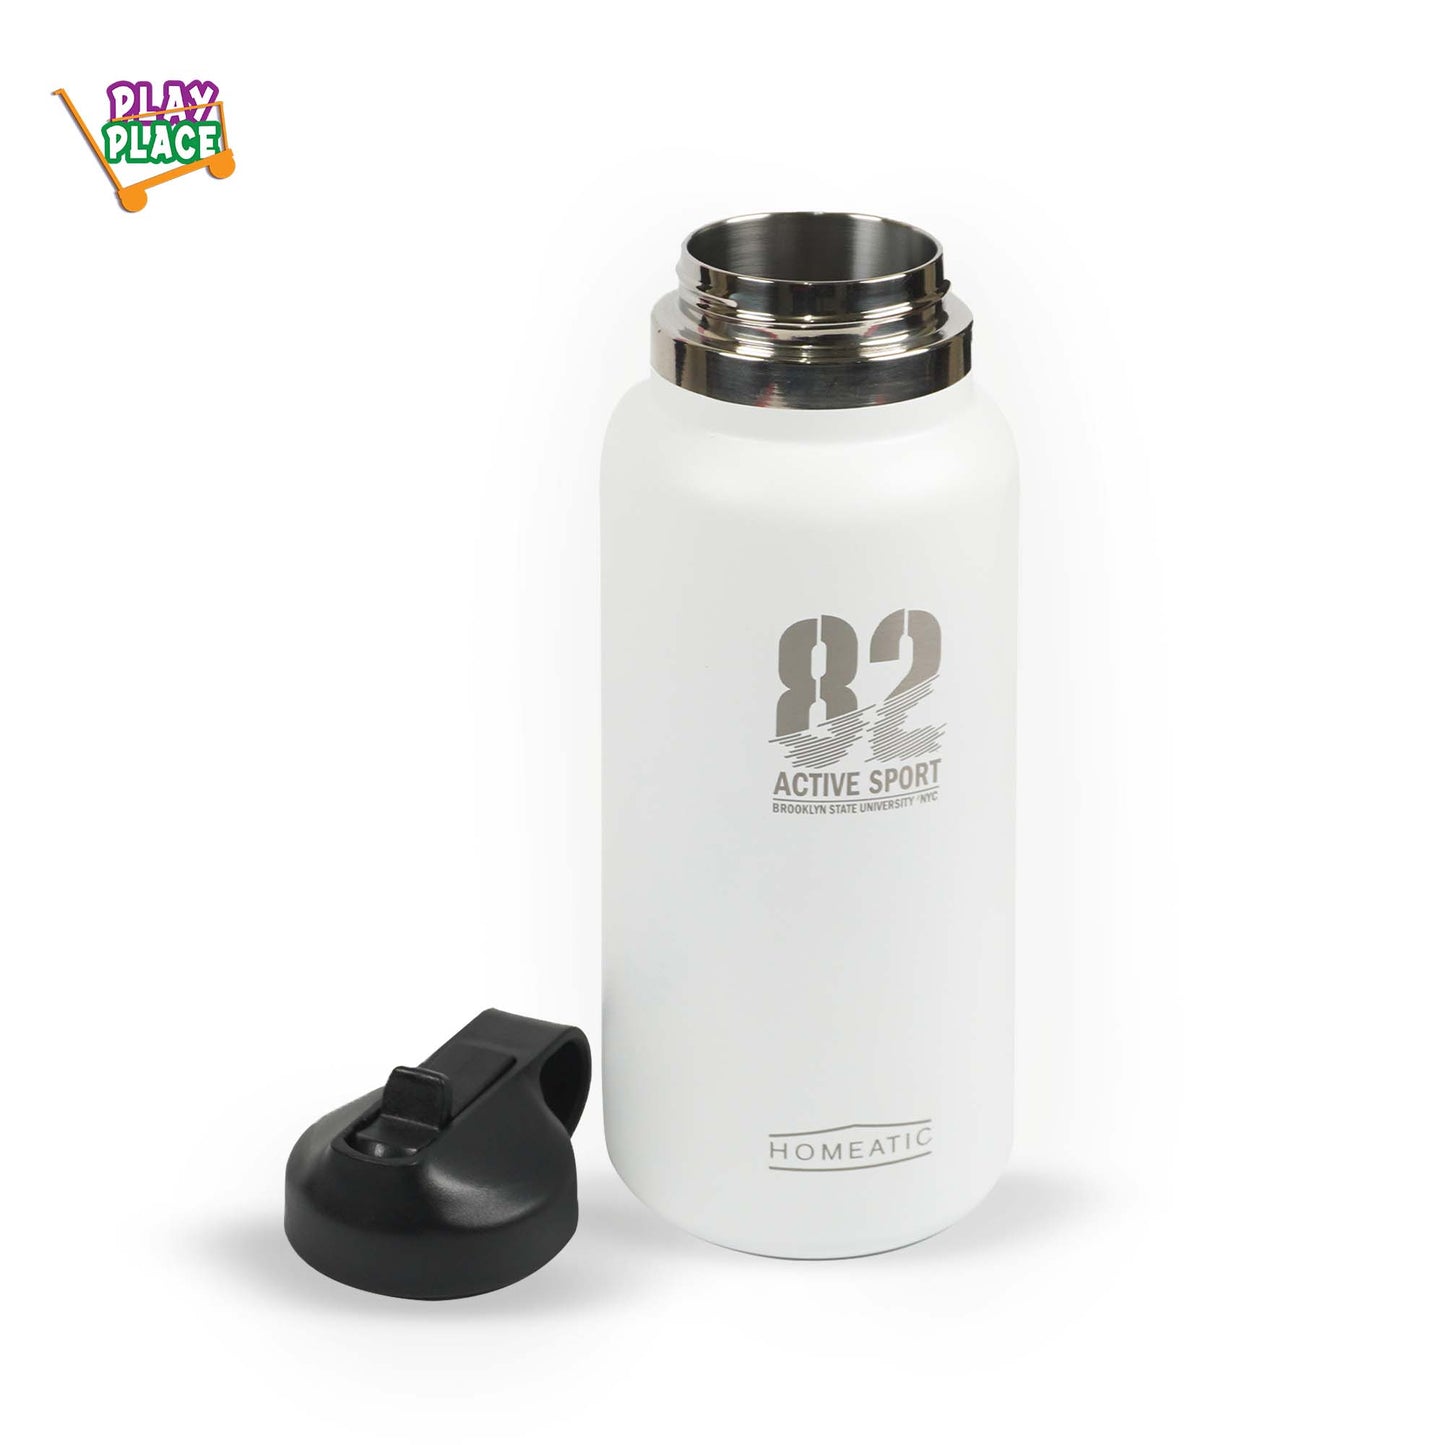 Homeatic 82 Active sport Insulated flask - White